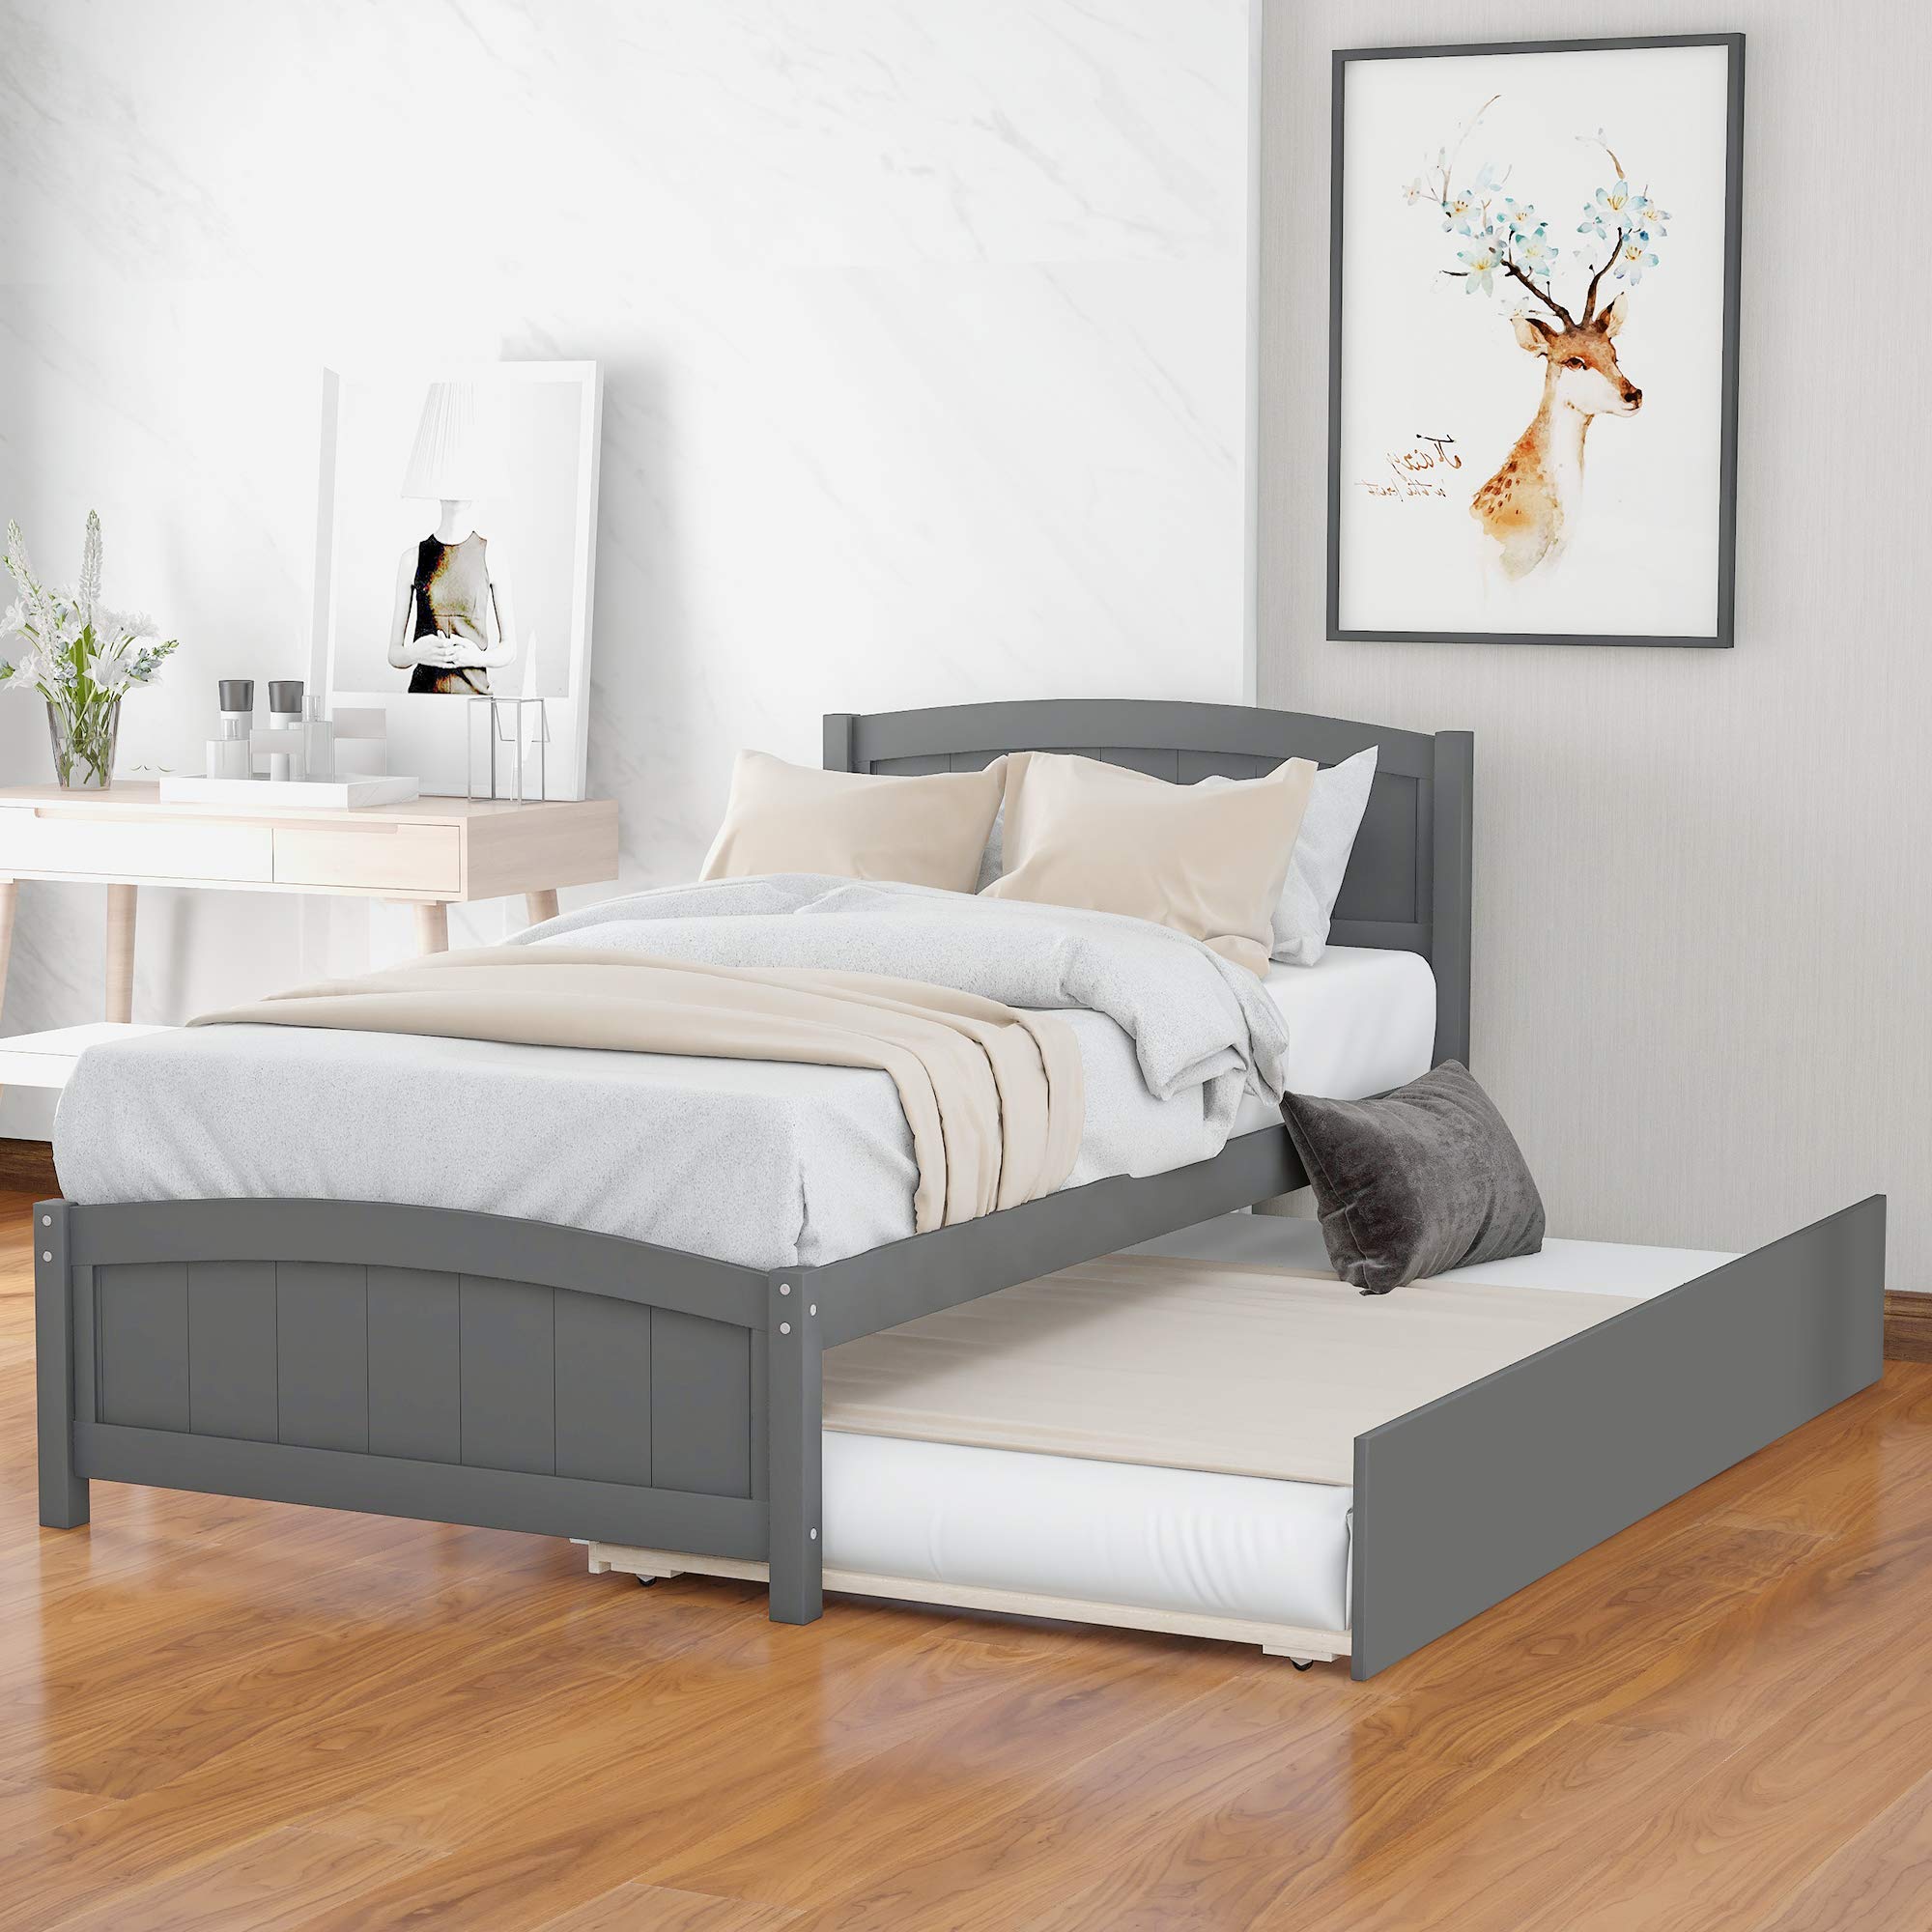 Tiokop Twin Size Platform Bed with Trundle,Twin Bed Frame with Headboard , Wood Twin Platform Bed with Pull Out Trundle for Bedr